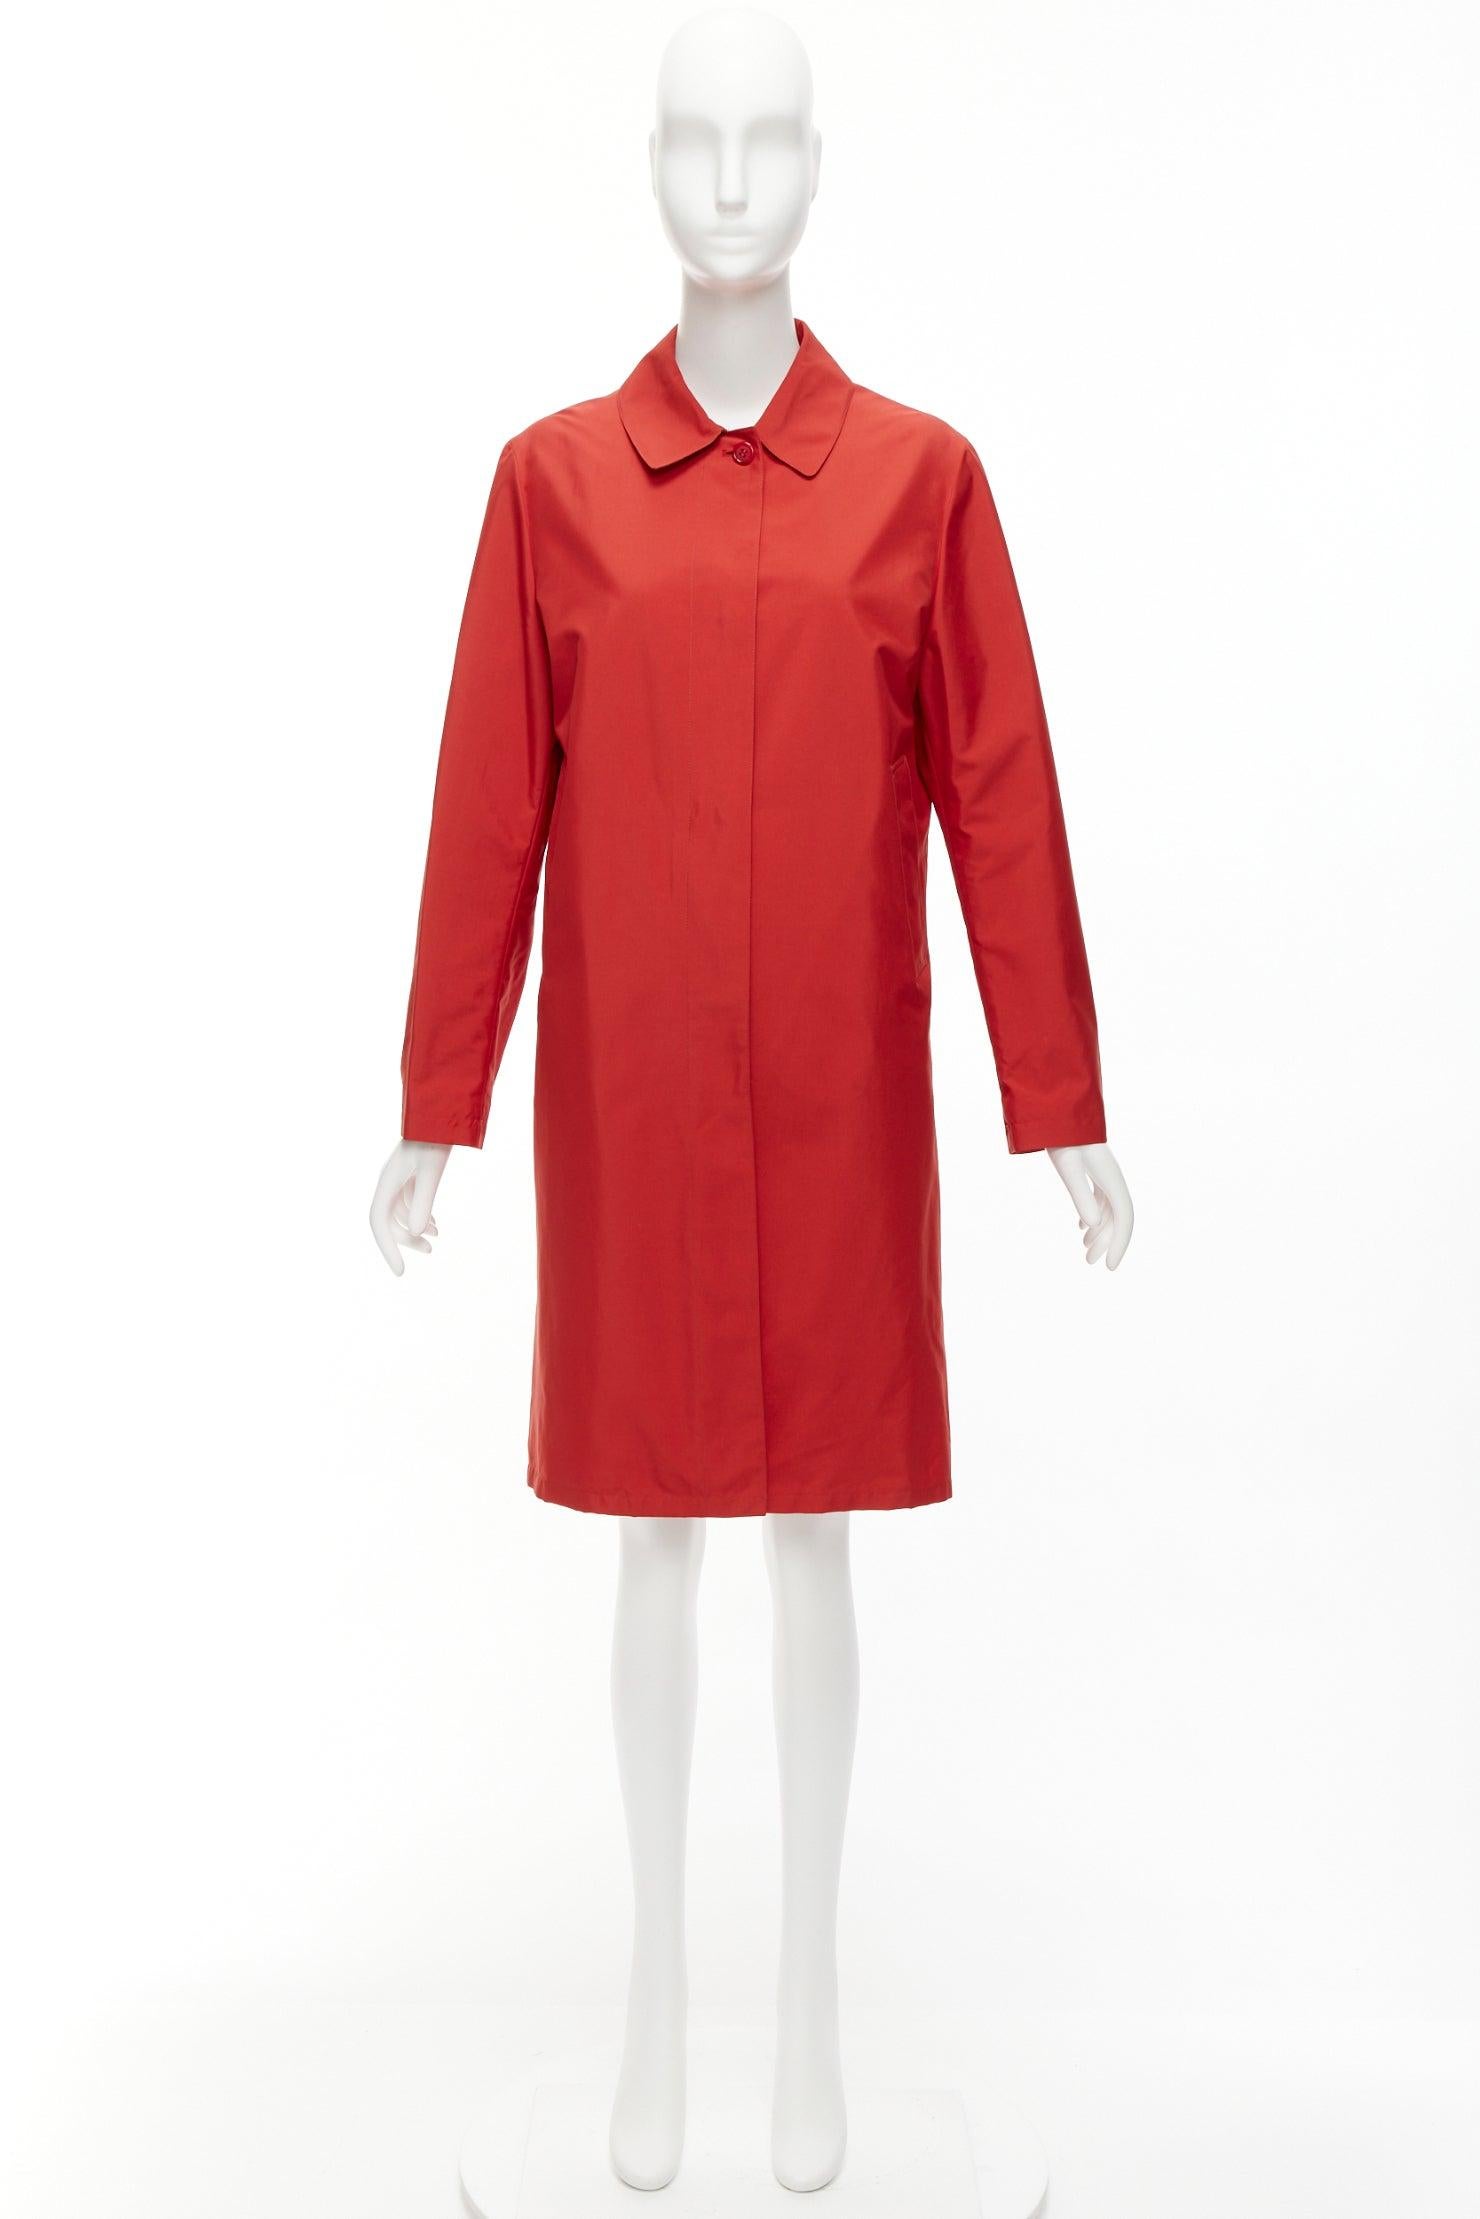 BURBERRY red nylon hidden button stand minimal classic longline trench jacket For Sale 6